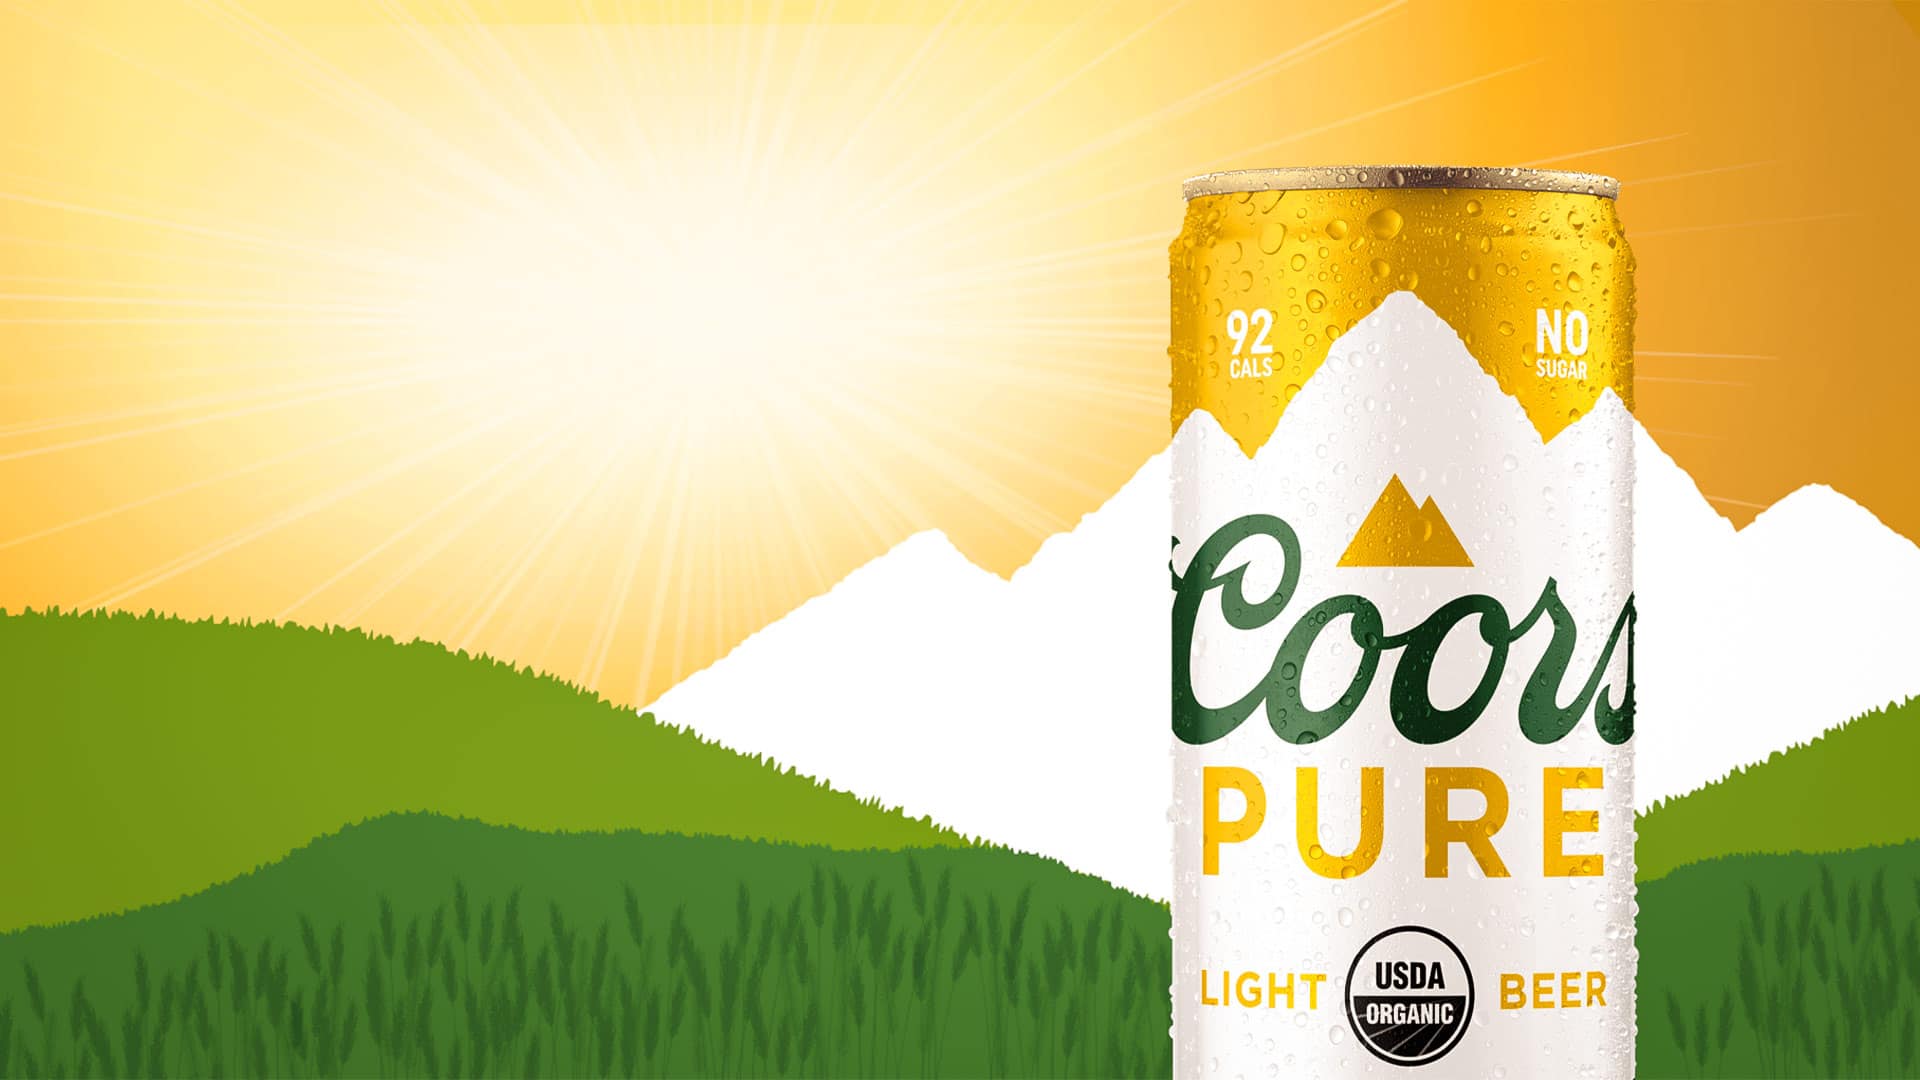 Is Coors Pure Gluten Free